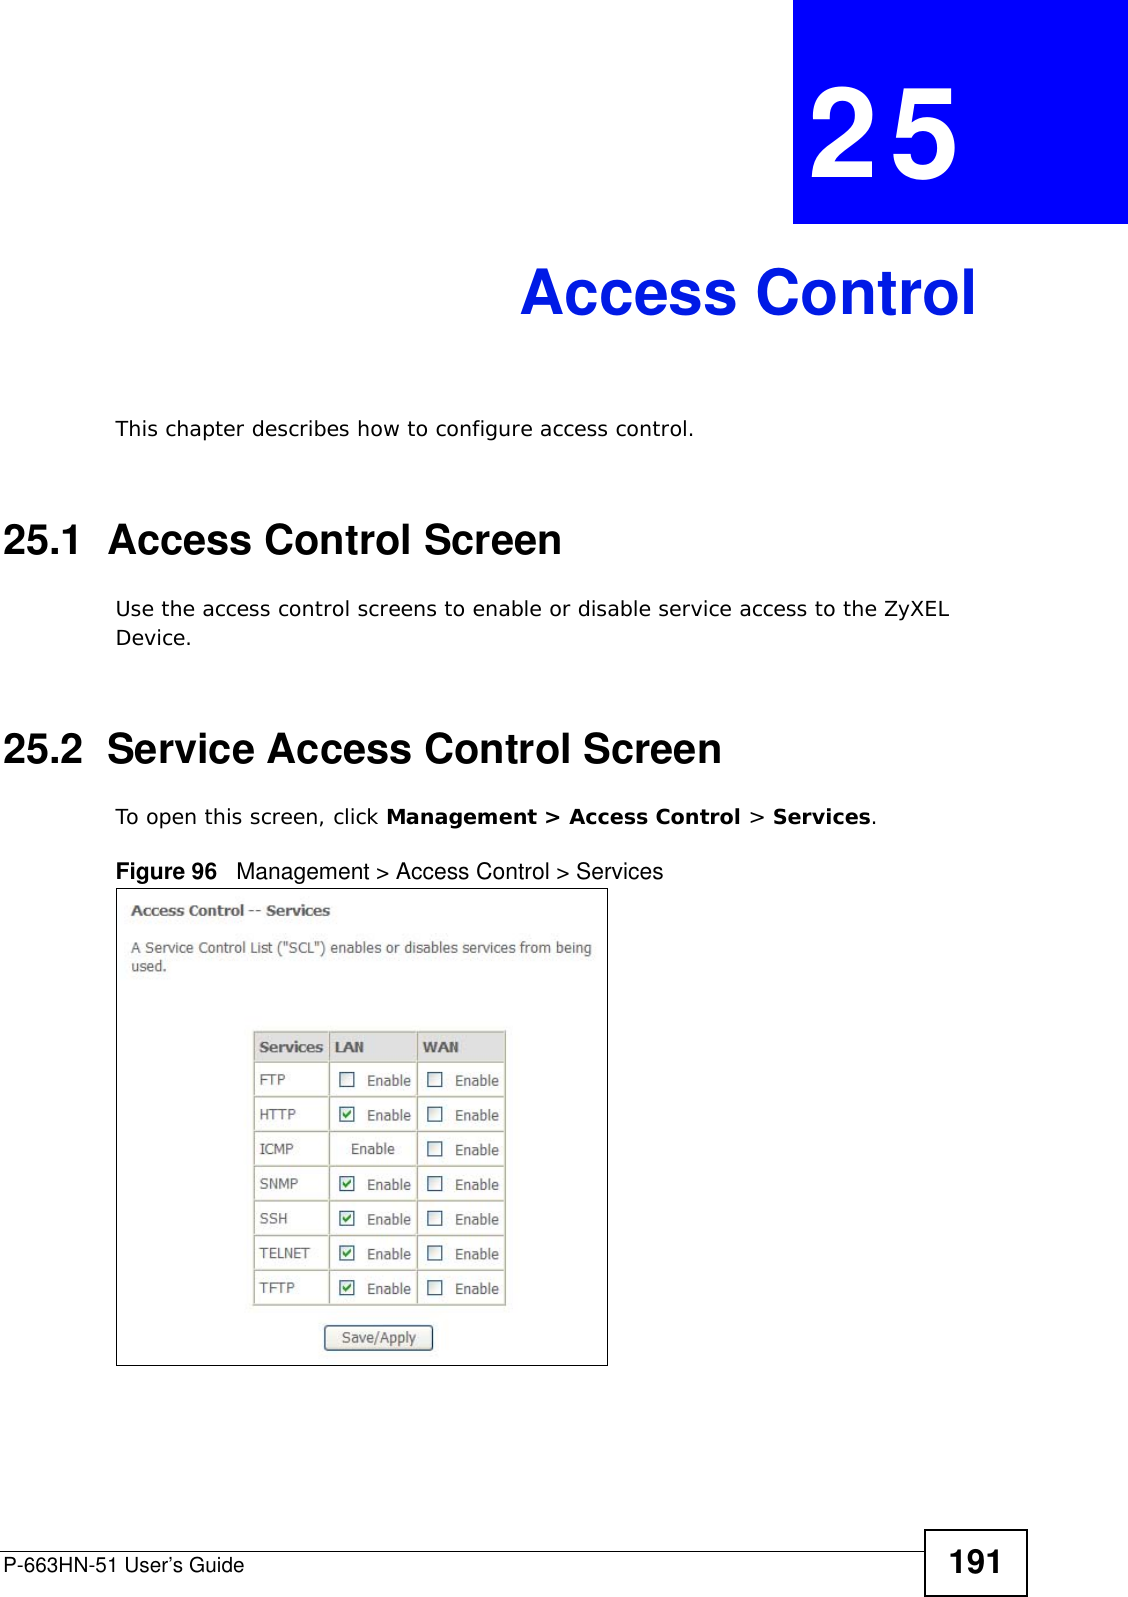 P-663HN-51 User’s Guide 191CHAPTER  25 Access ControlThis chapter describes how to configure access control.25.1  Access Control ScreenUse the access control screens to enable or disable service access to the ZyXEL Device.25.2  Service Access Control ScreenTo open this screen, click Management &gt; Access Control &gt; Services.Figure 96   Management &gt; Access Control &gt; Services